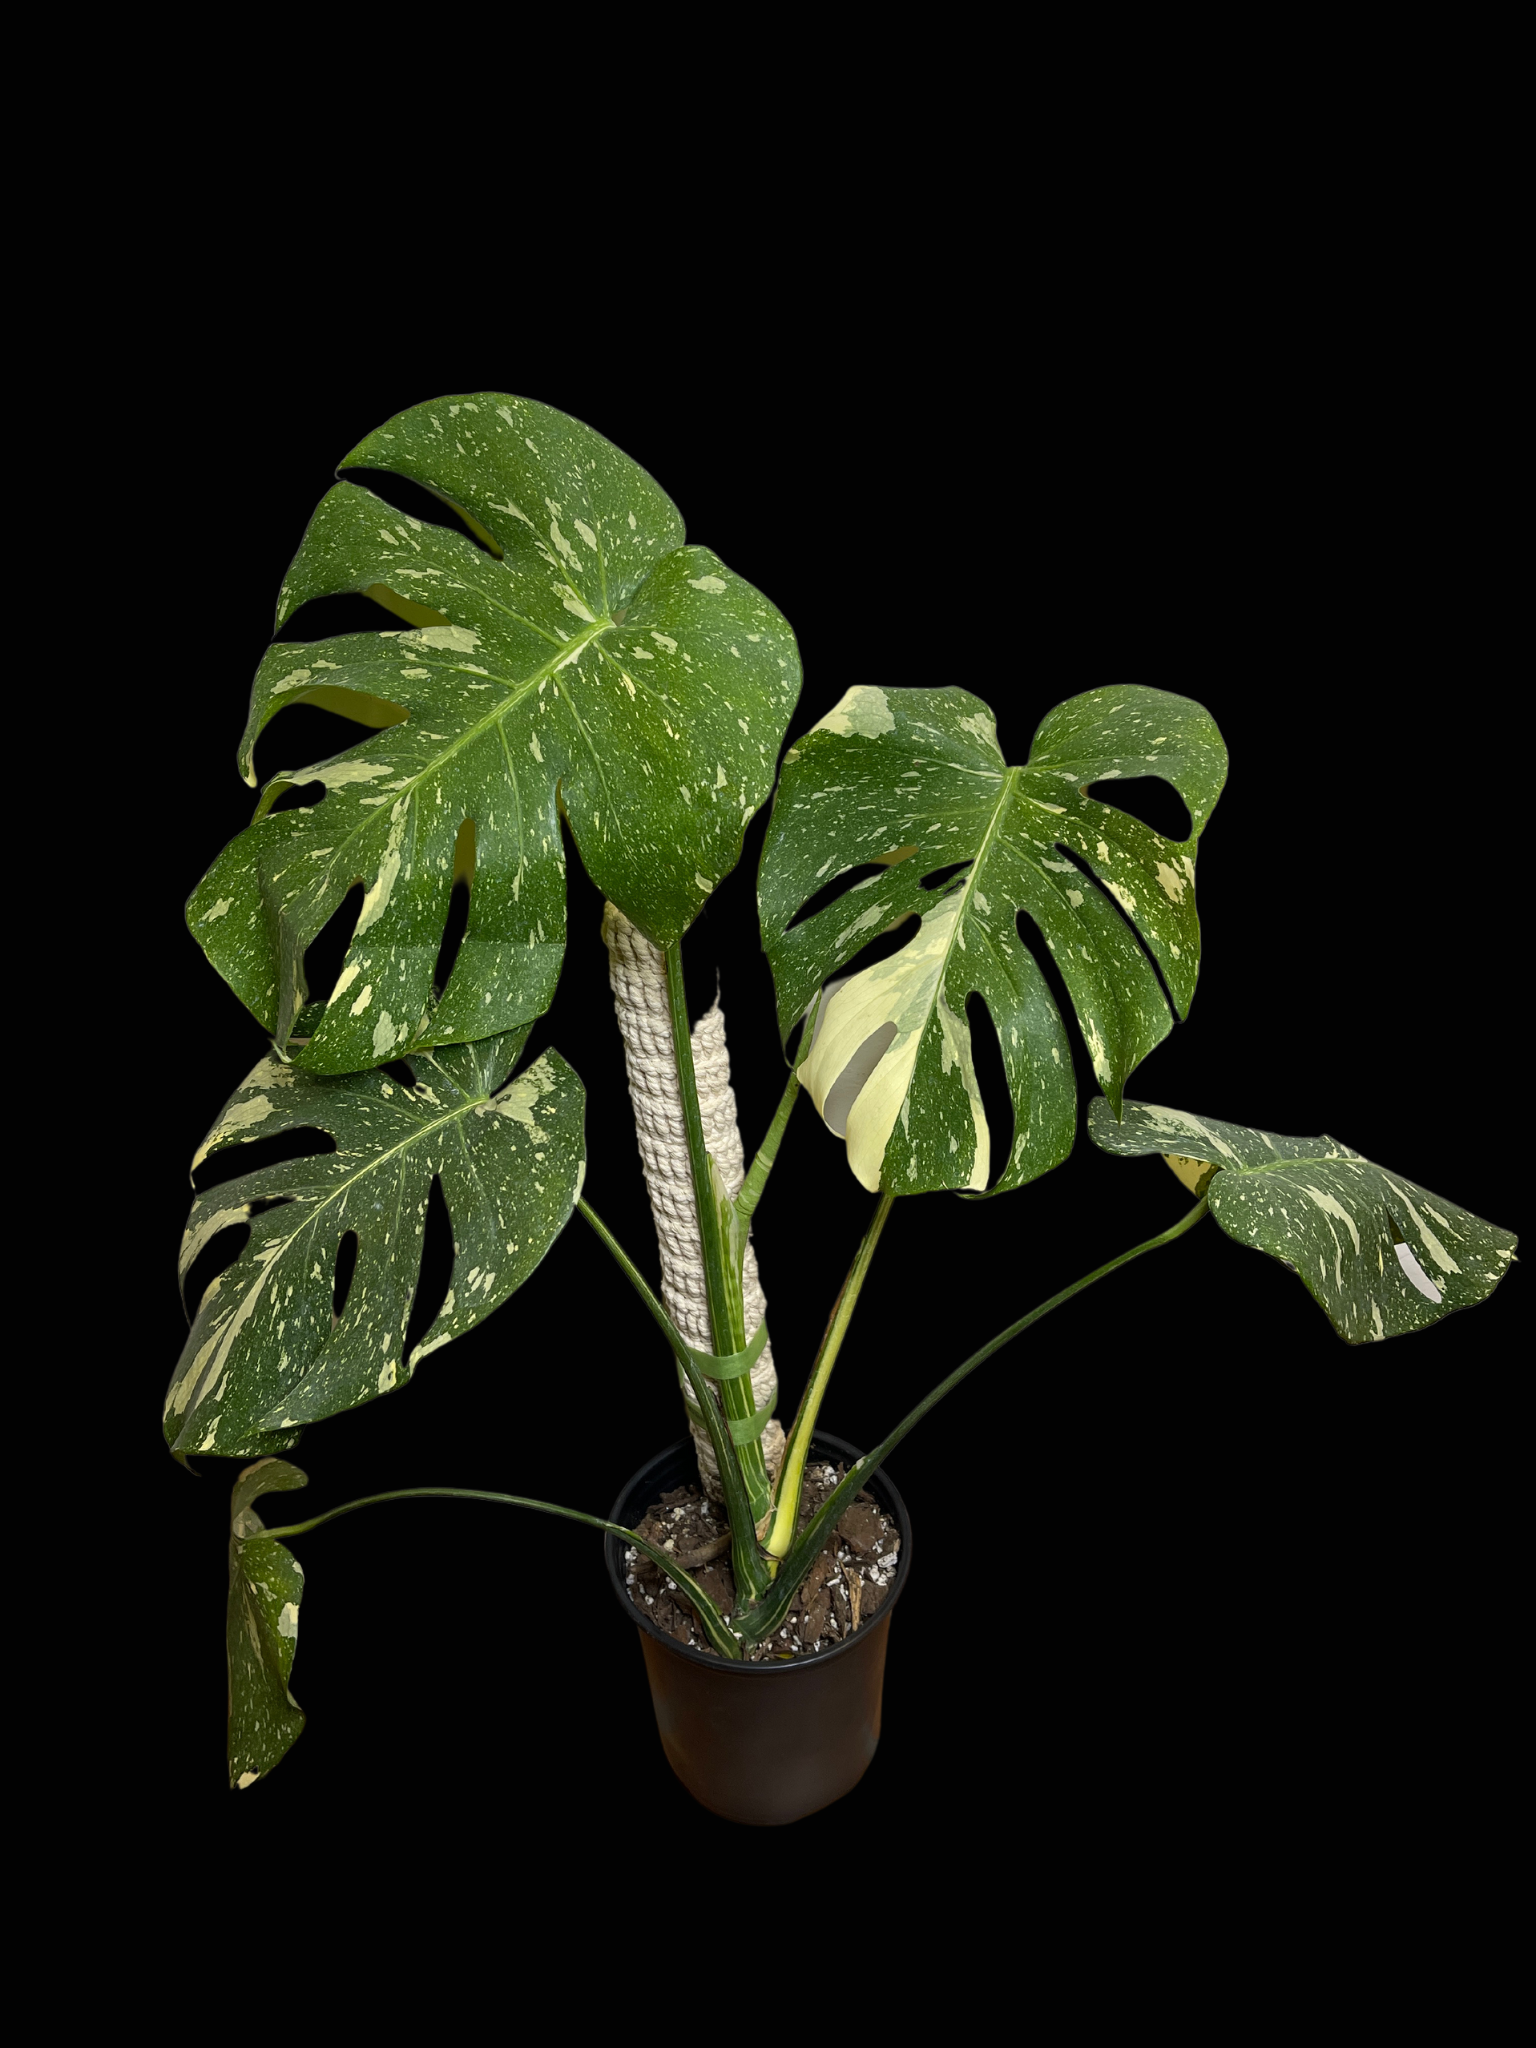 5 Most-Wanted Rare Houseplants